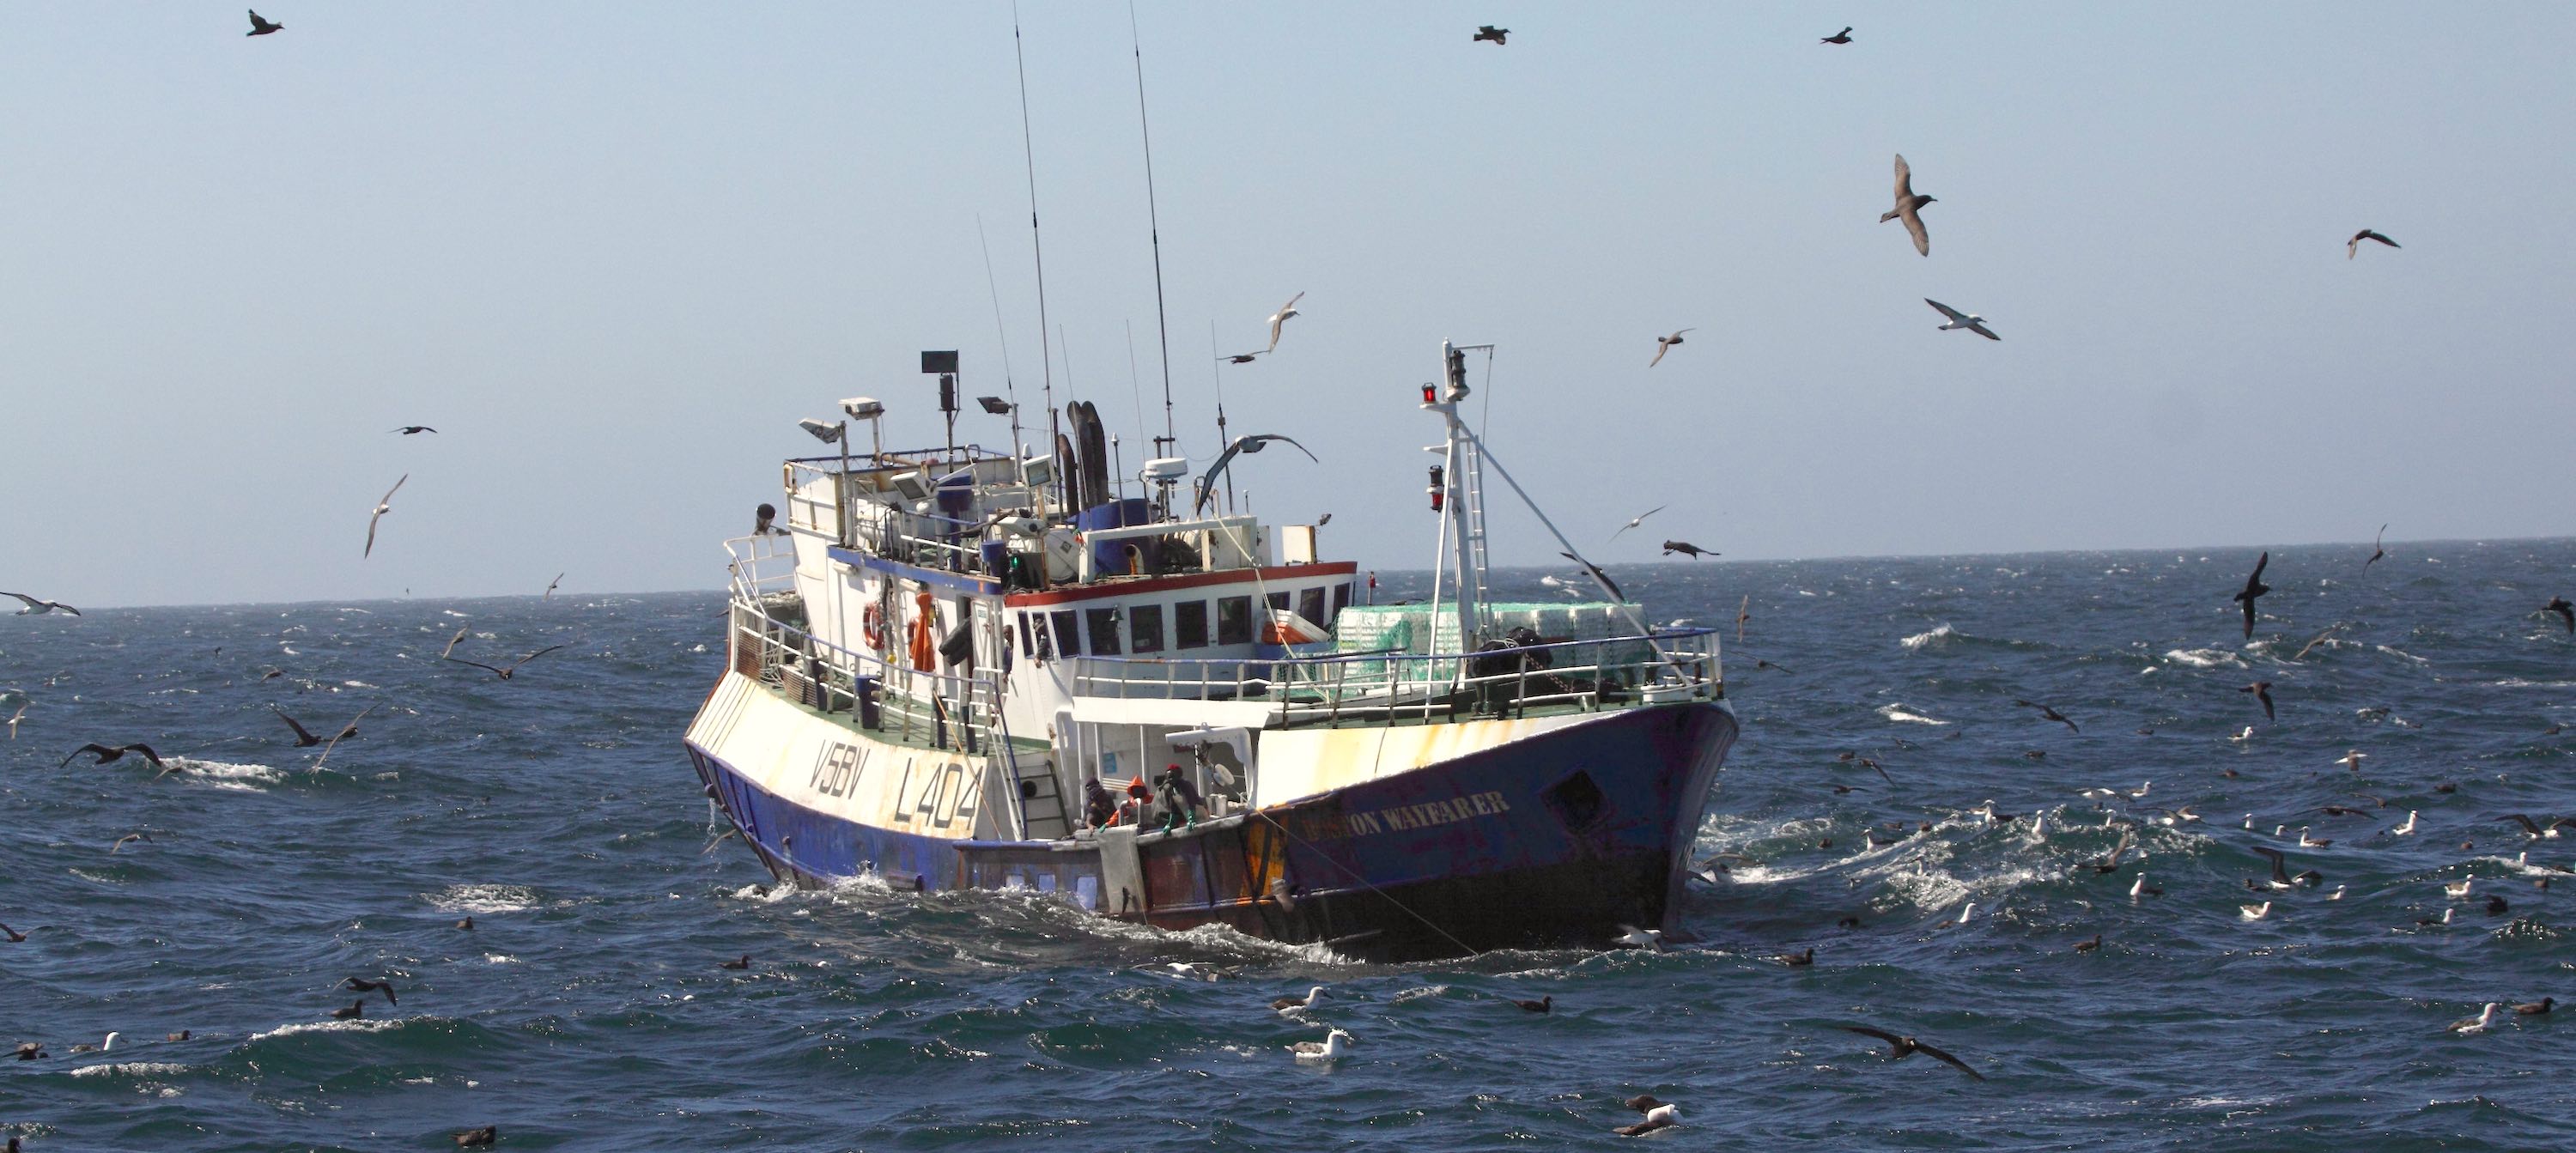 A fishing vessel at sea surrounded by birds.